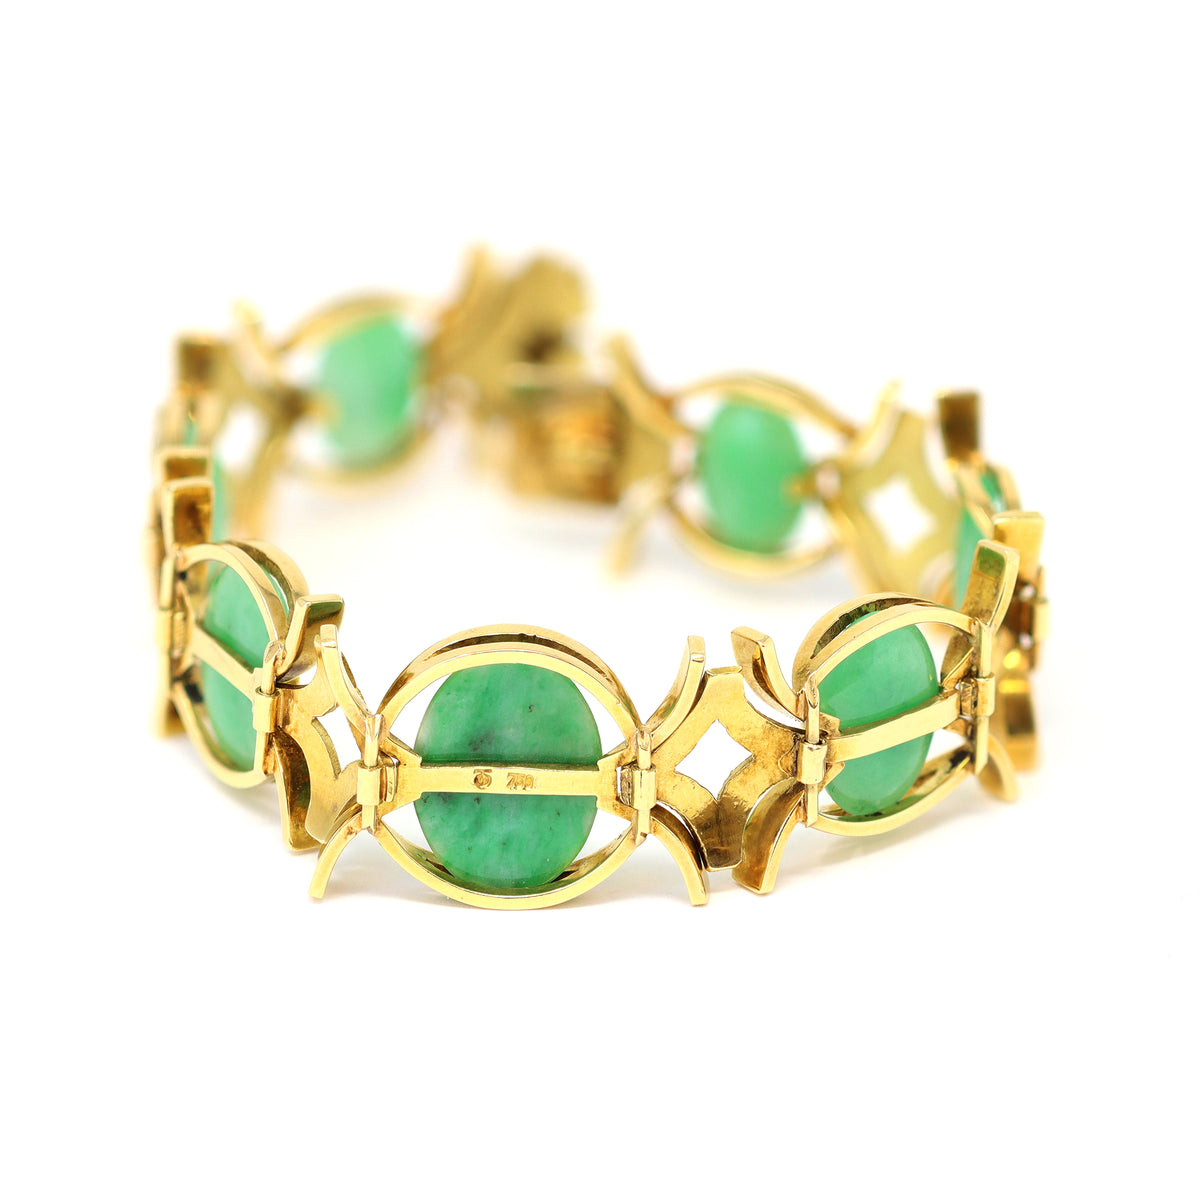 natural cabochon jadeite and 18k yellow gold bracelet hallmarks view 